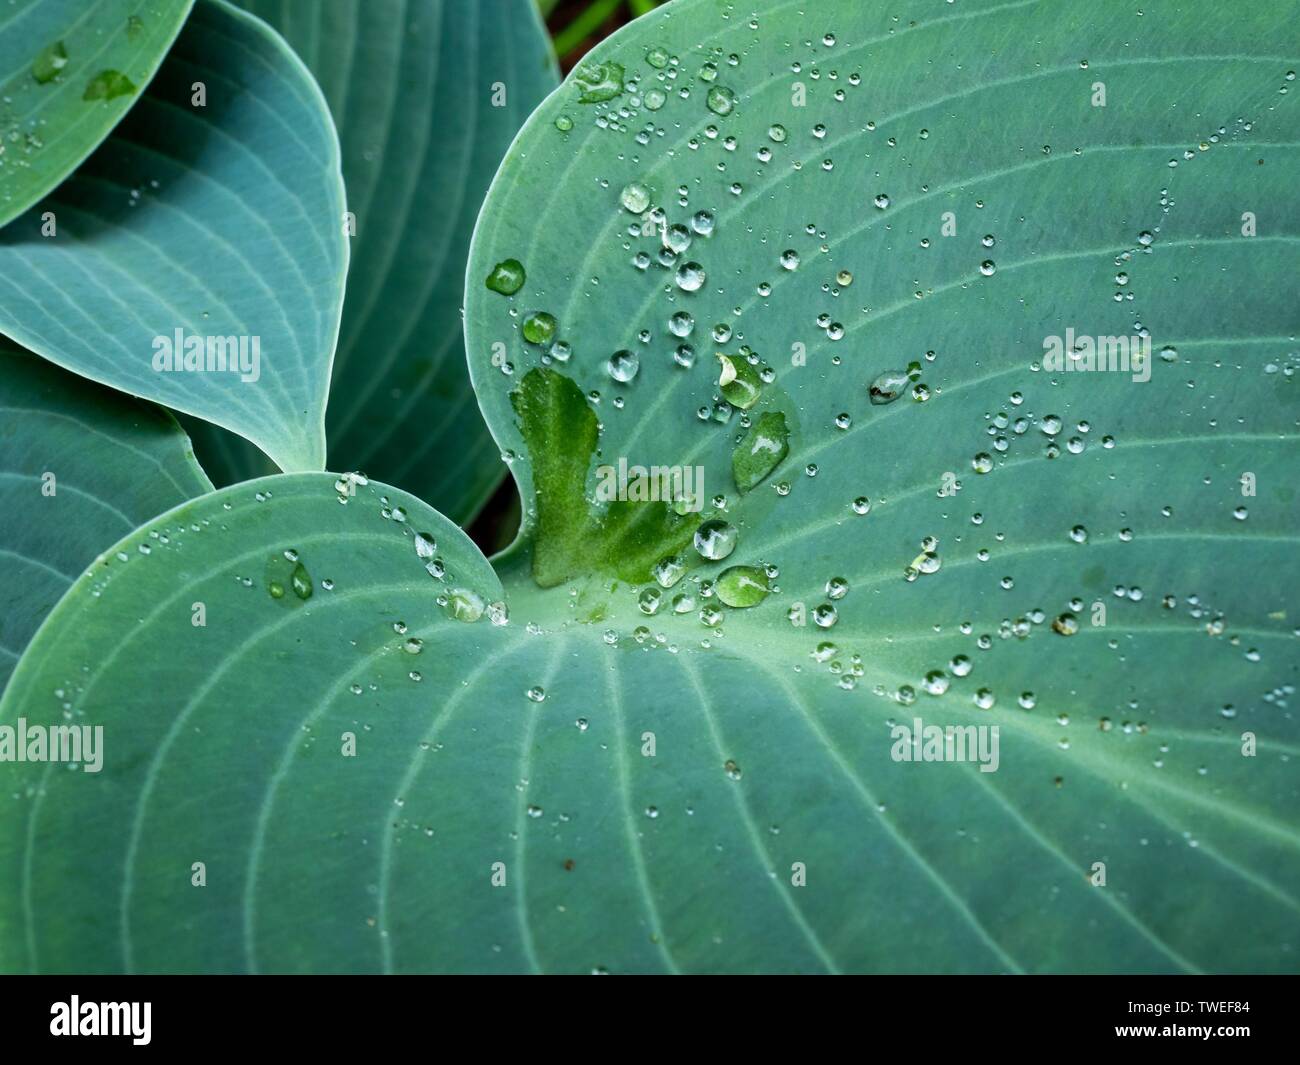 Drops of water held in surface tension on the leaf of a Halcyon Hosta plant Stock Photo